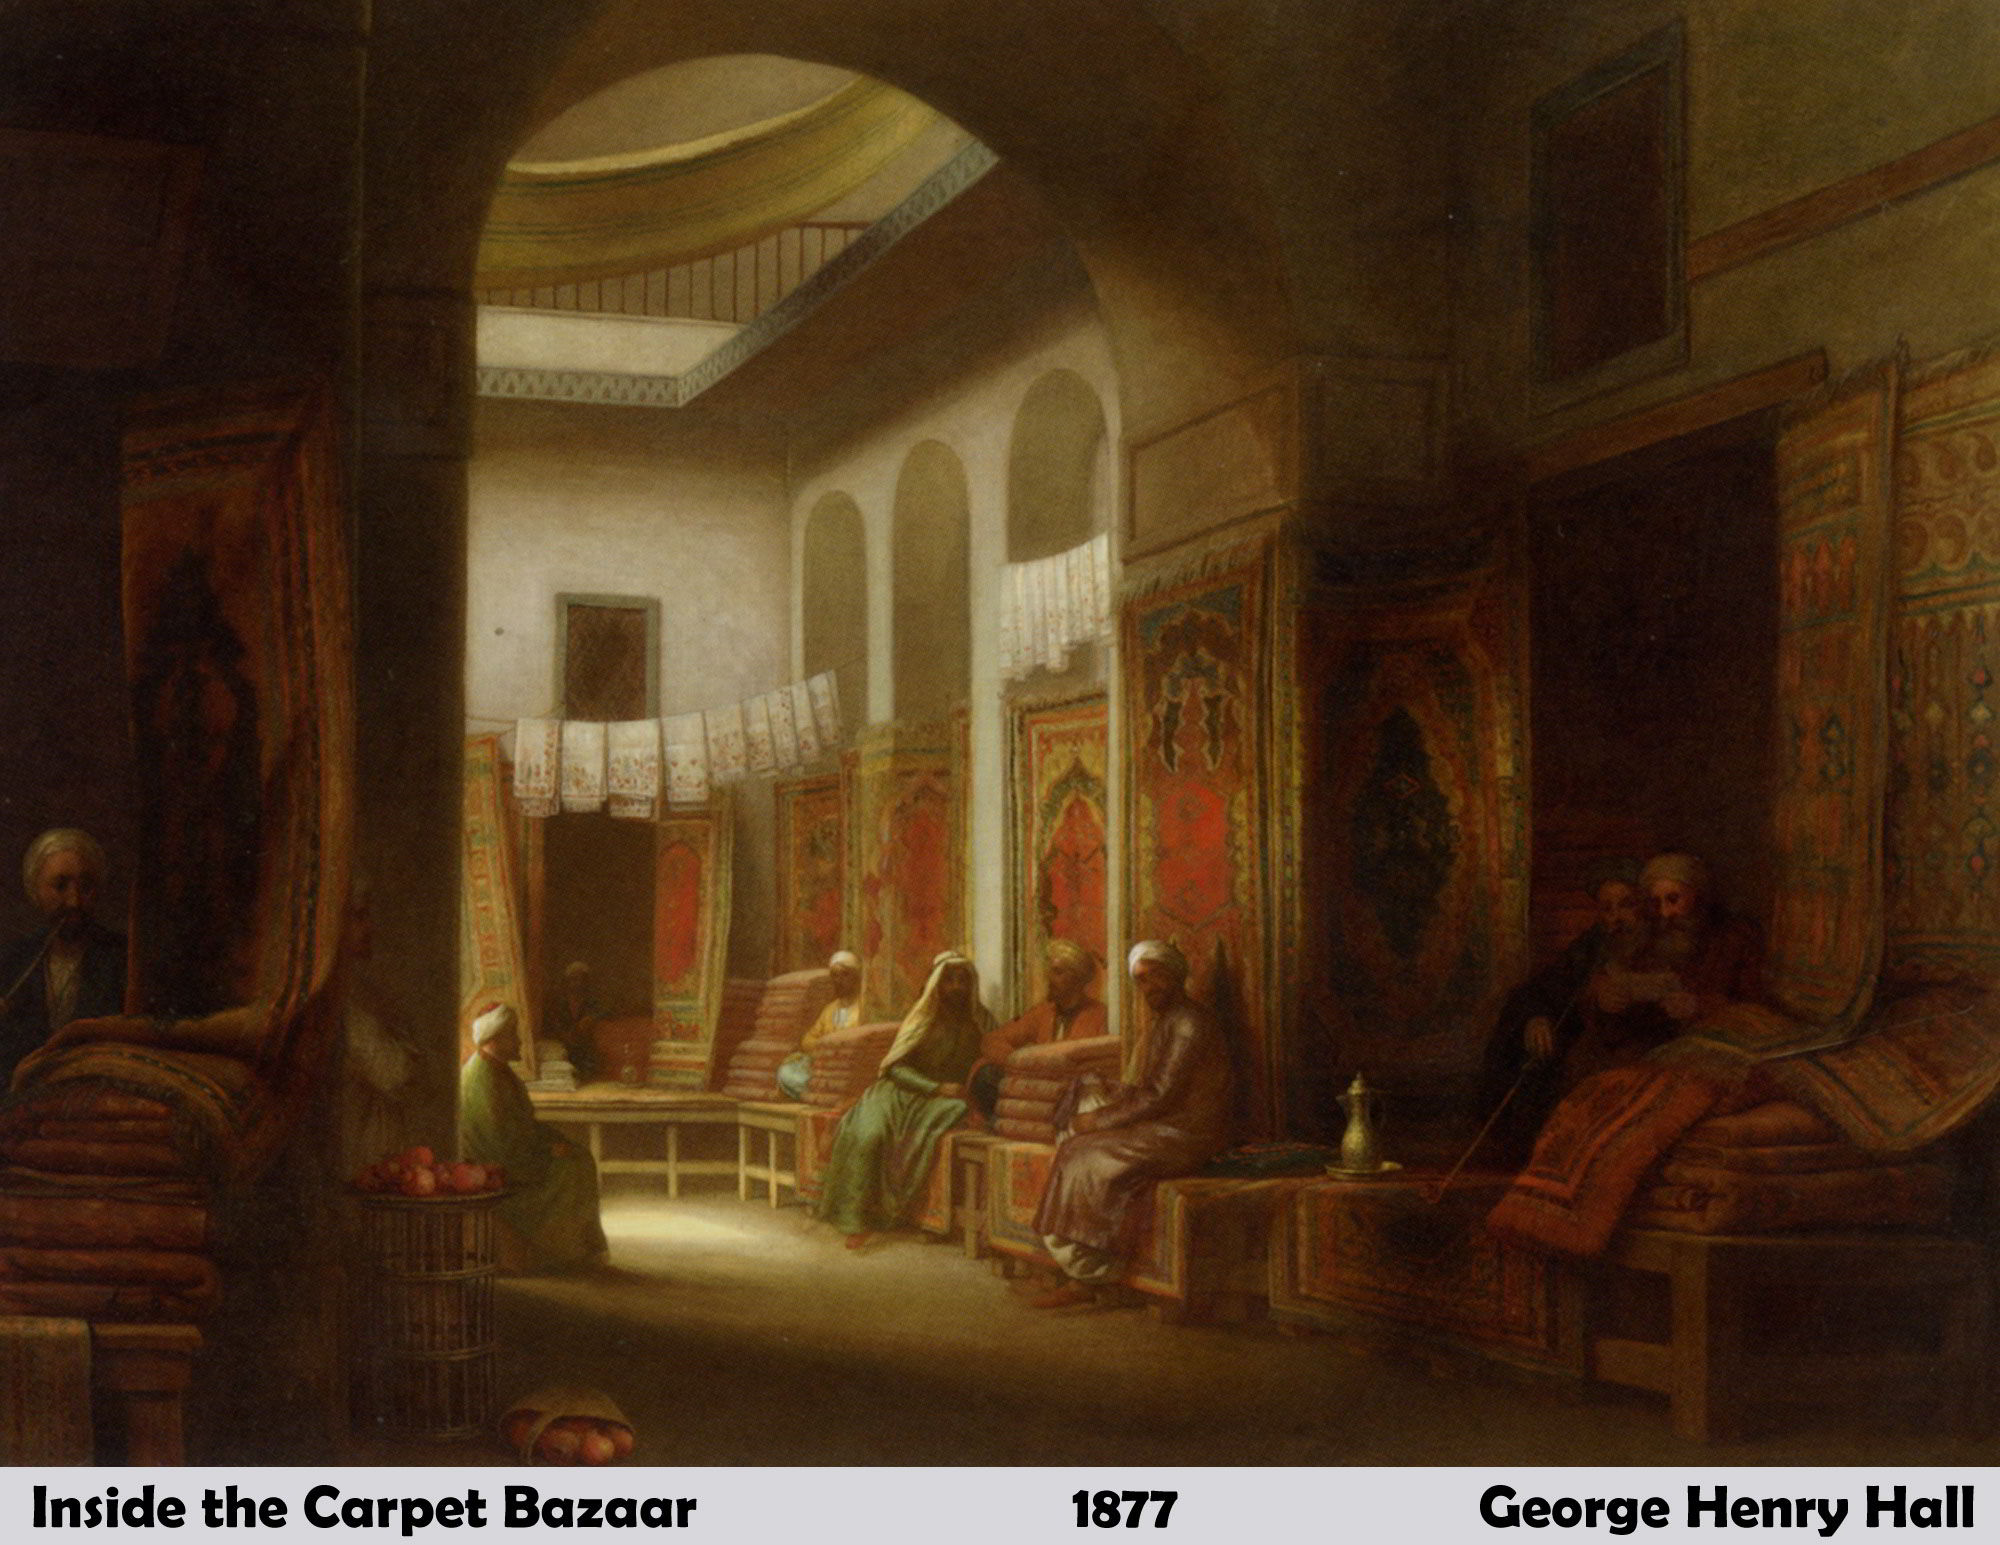 Inside the Carpet Bazaar by George Henry Hall